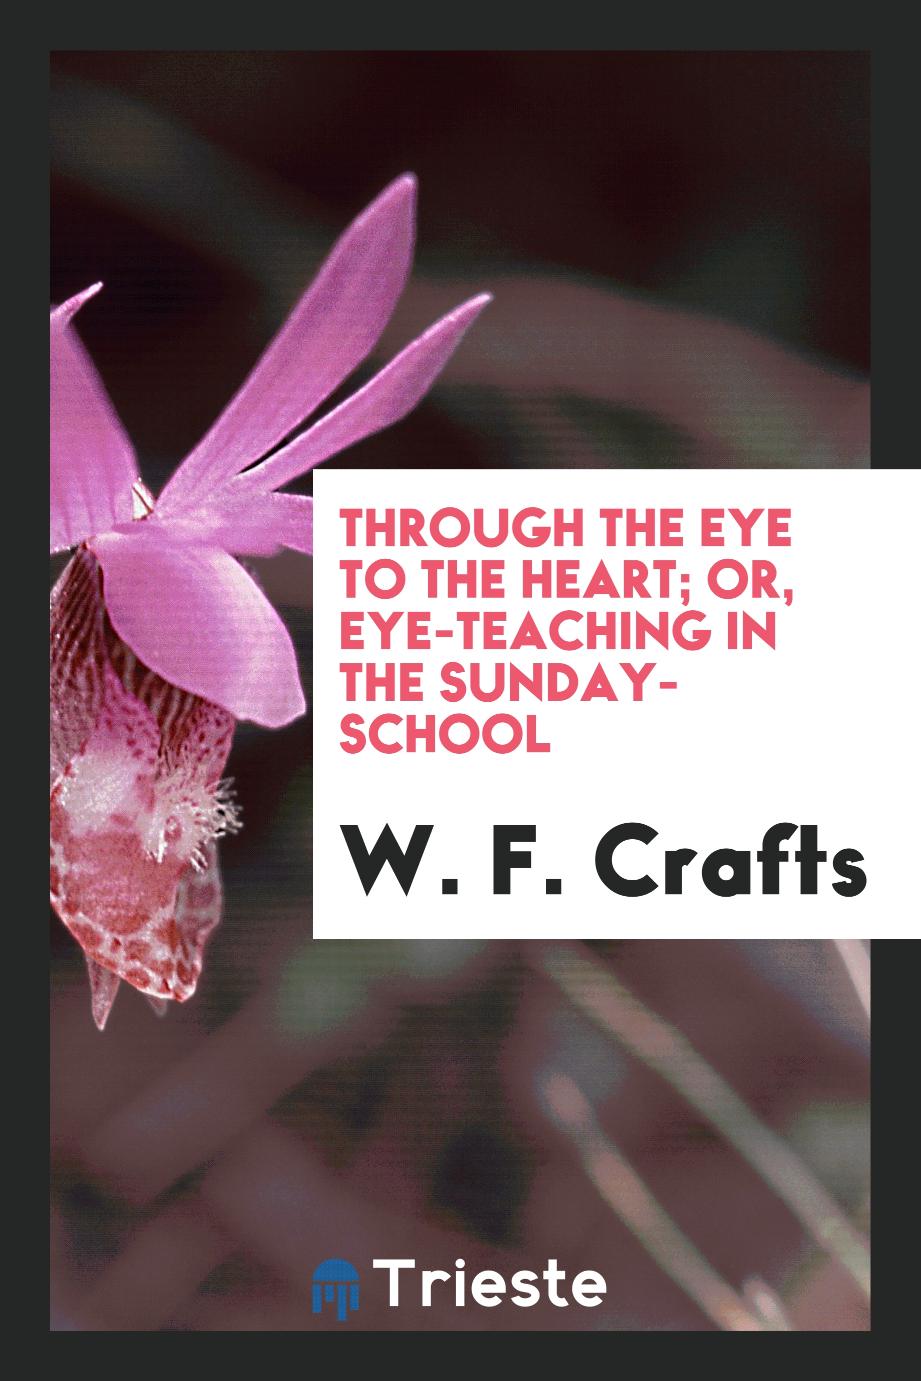 Through the eye to the heart; or, Eye-teaching in the Sunday-school